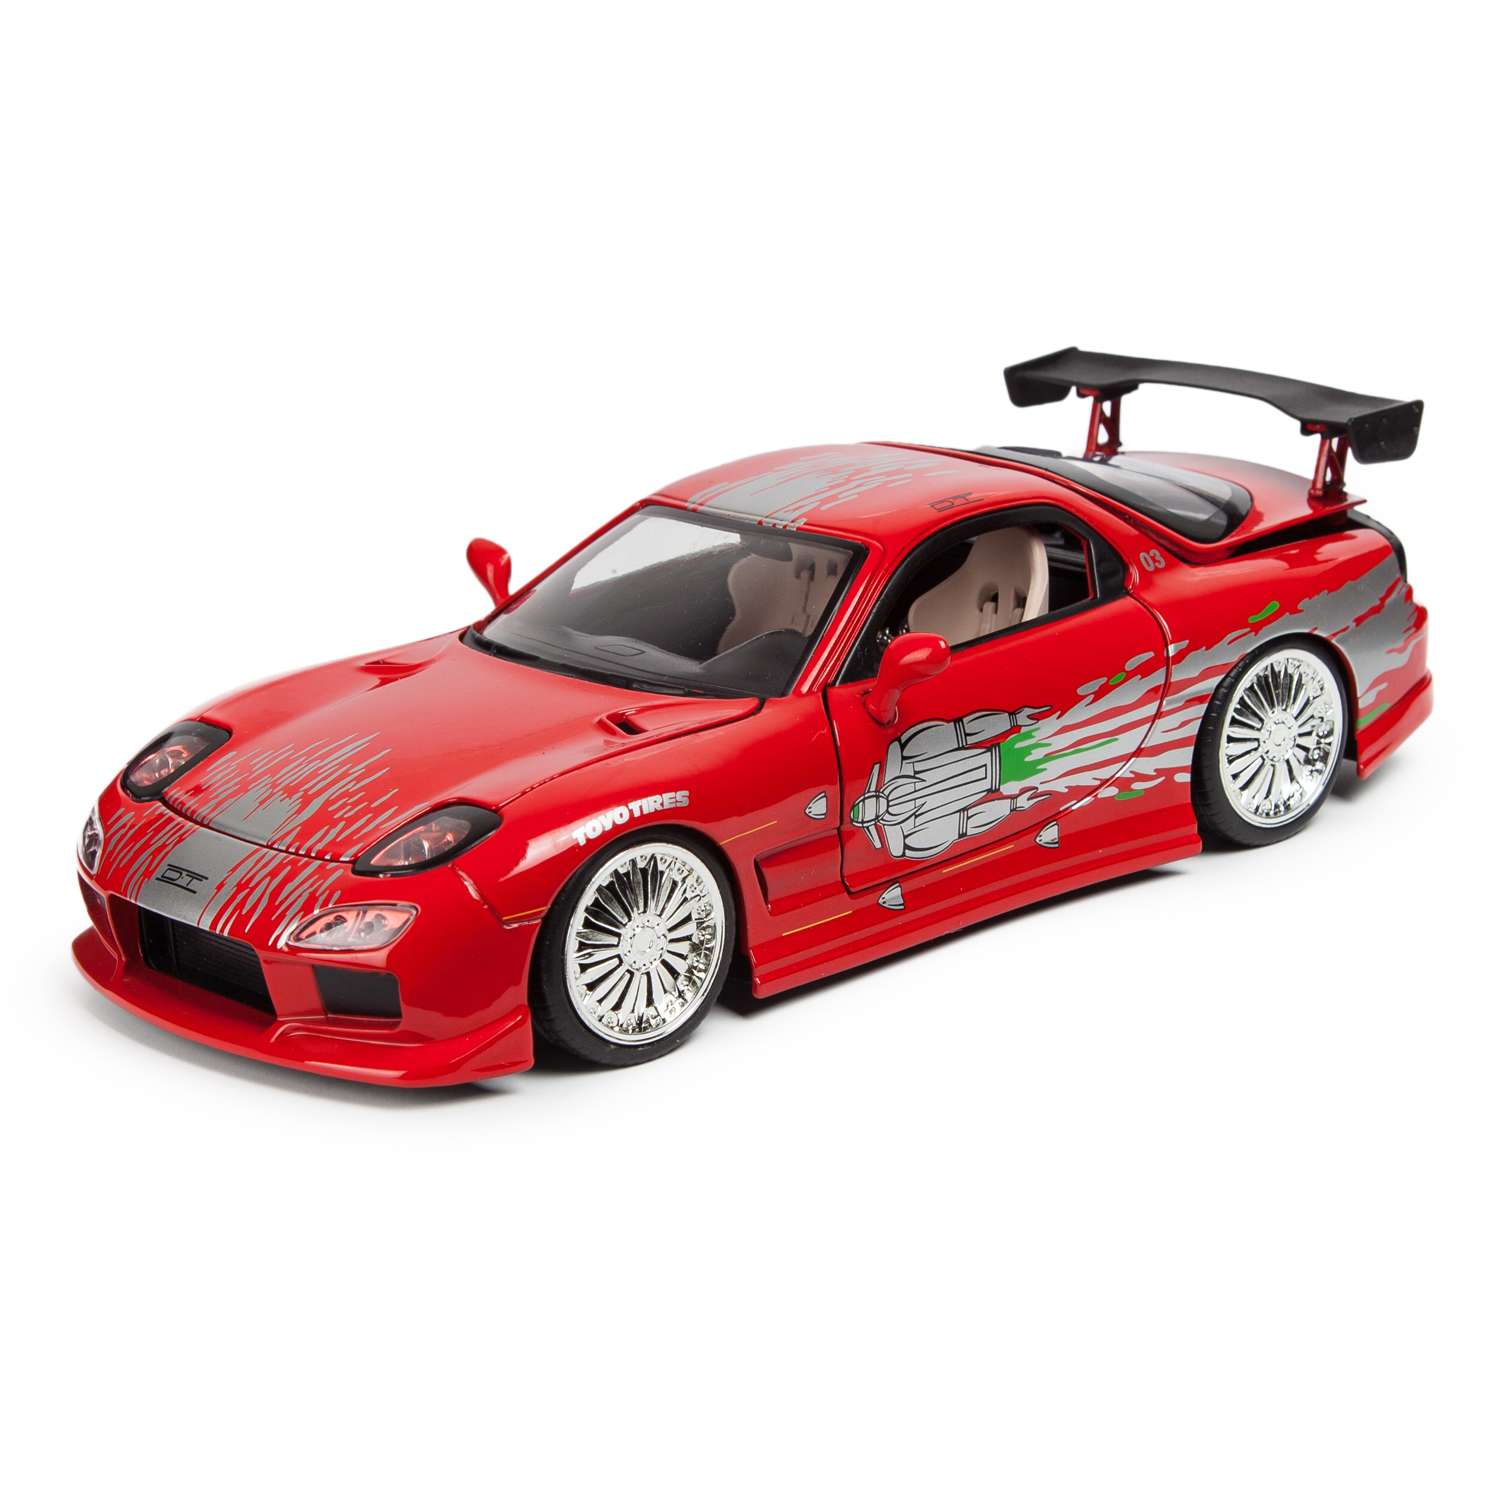 Машинка Fast and Furious Fast and Furious 1:24 1993 Mazda Rx-7 Fd3s-Wide Body Красная 98338 98338 - фото 1